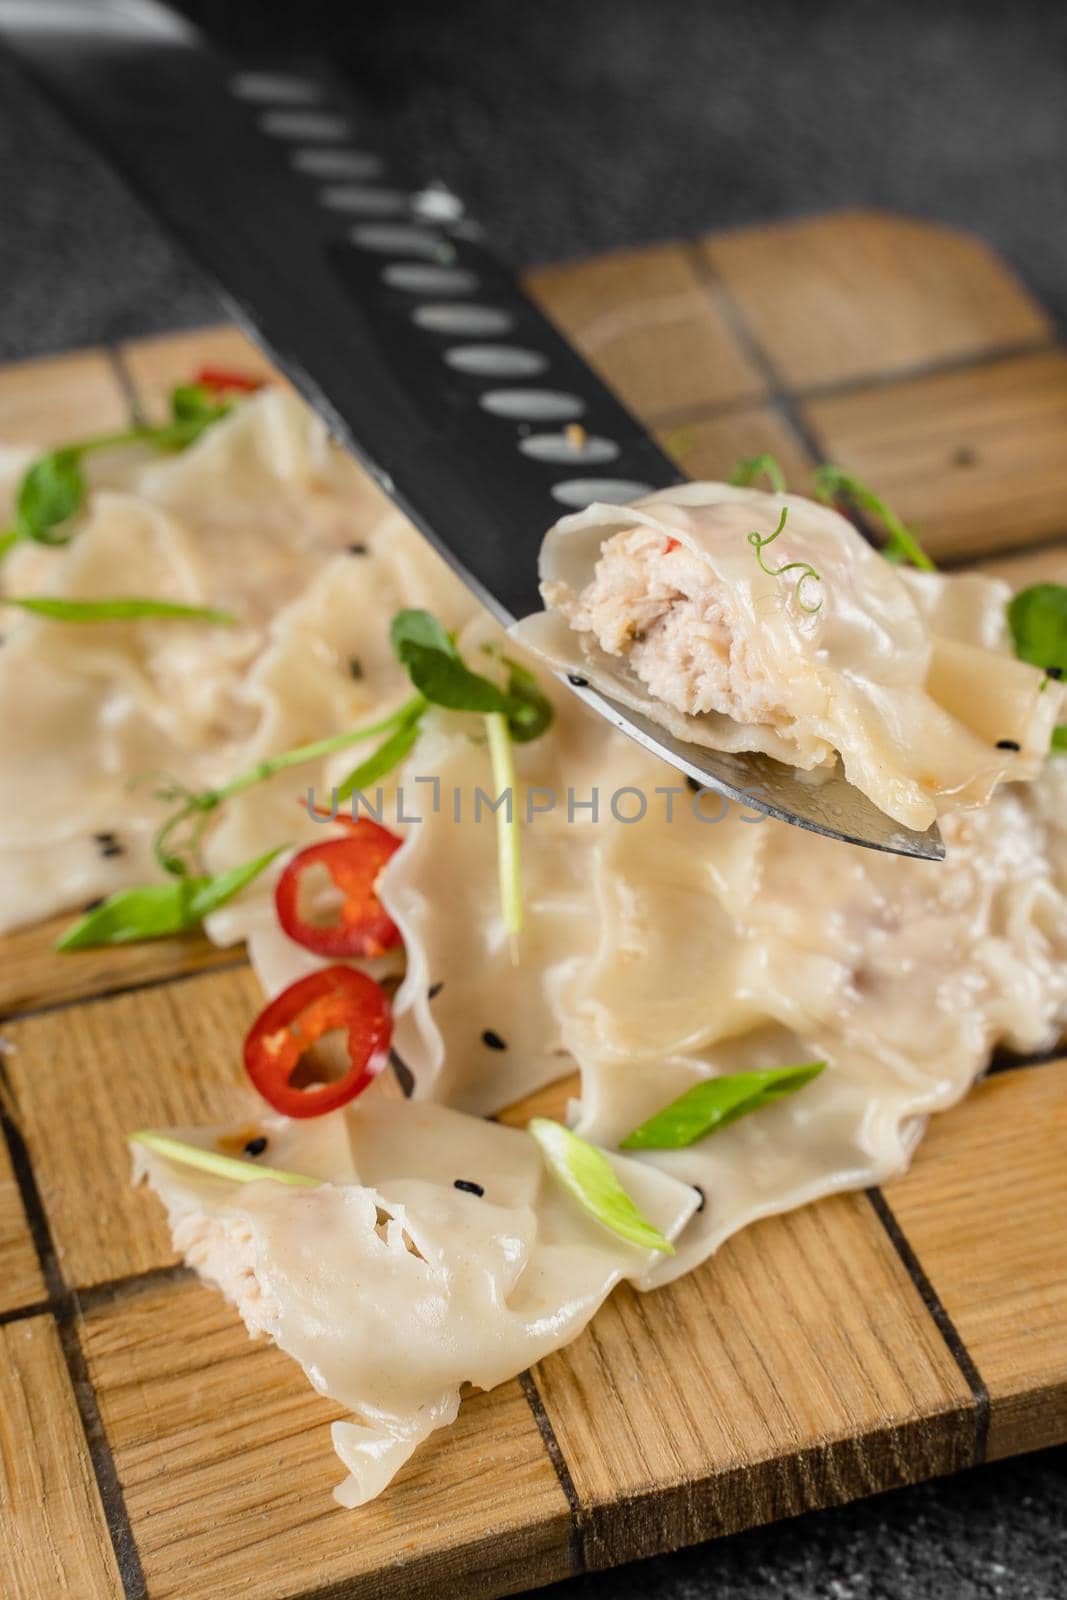 Jiaozi chinese dumplings named gyoza on wooden plate. Asian traditional fast food. Dough dish stuffed with meat and vegetables, less often only meat